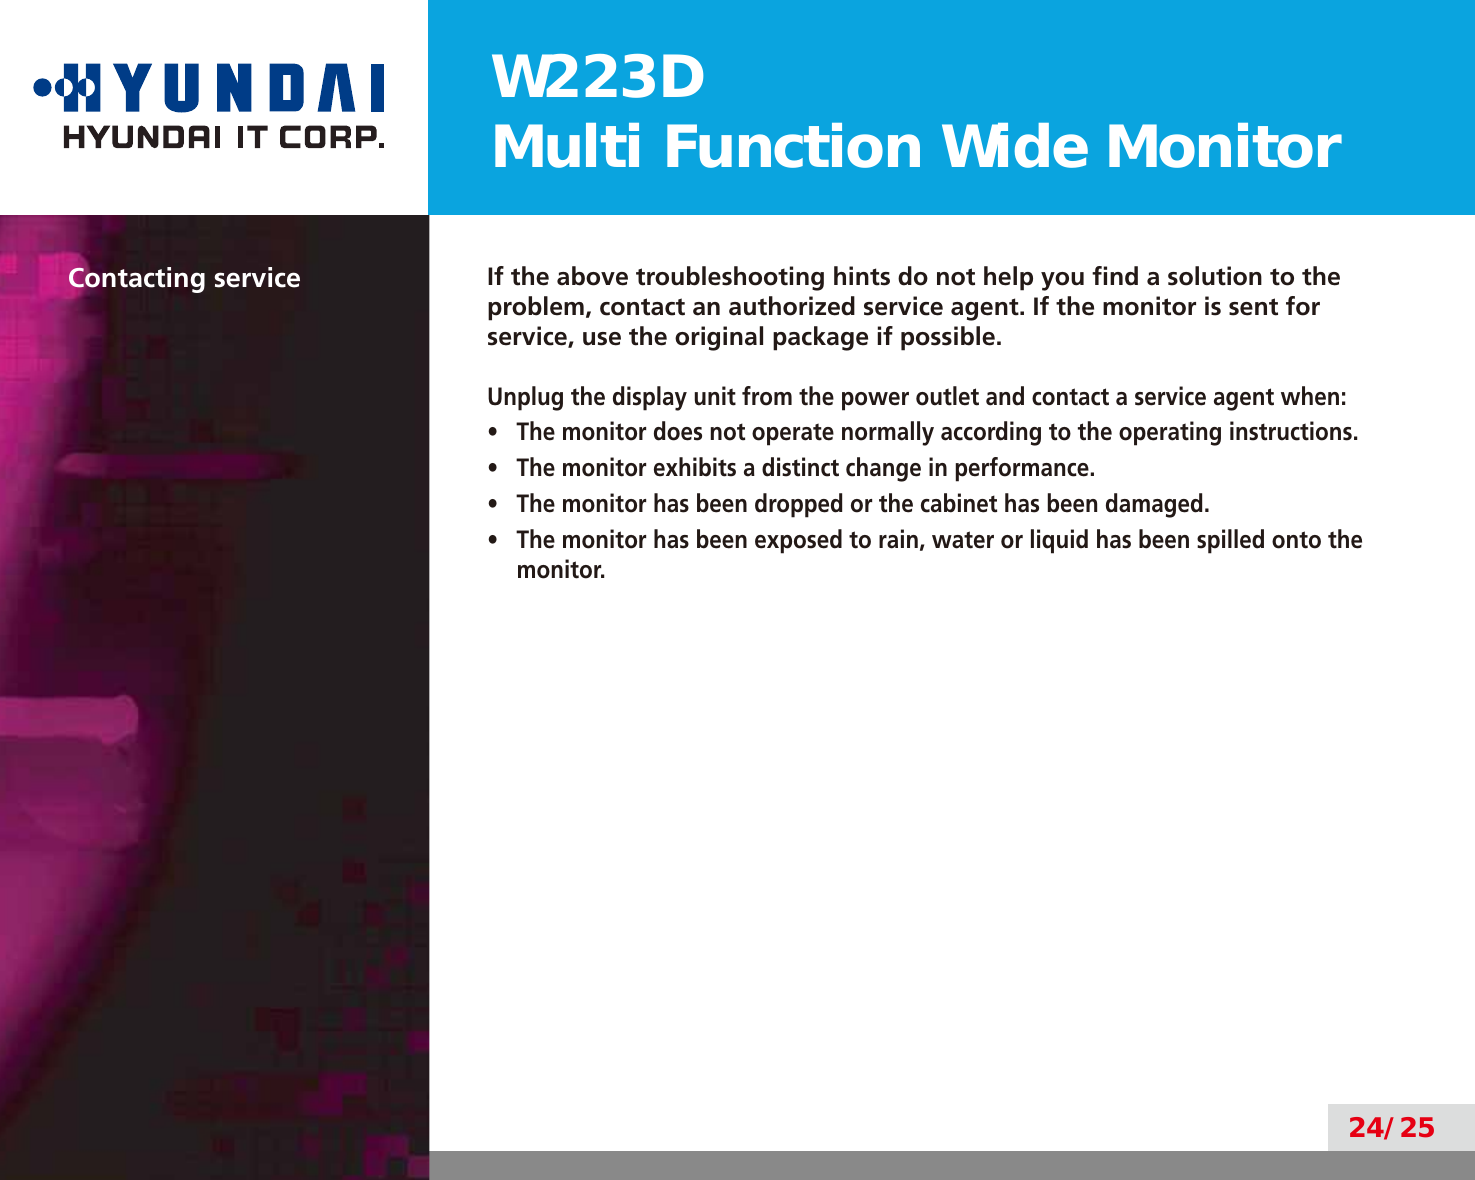 W223DMulti Function Wide Monitor24/25Contacting service If the above troubleshooting hints do not help you ﬁnd a solution to the problem, contact an authorized service agent. If the monitor is sent for service, use the original package if possible.Unplug the display unit from the power outlet and contact a service agent when:•  The monitor does not operate normally according to the operating instructions.•  The monitor exhibits a distinct change in performance.•  The monitor has been dropped or the cabinet has been damaged.•  The monitor has been exposed to rain, water or liquid has been spilled onto the monitor.